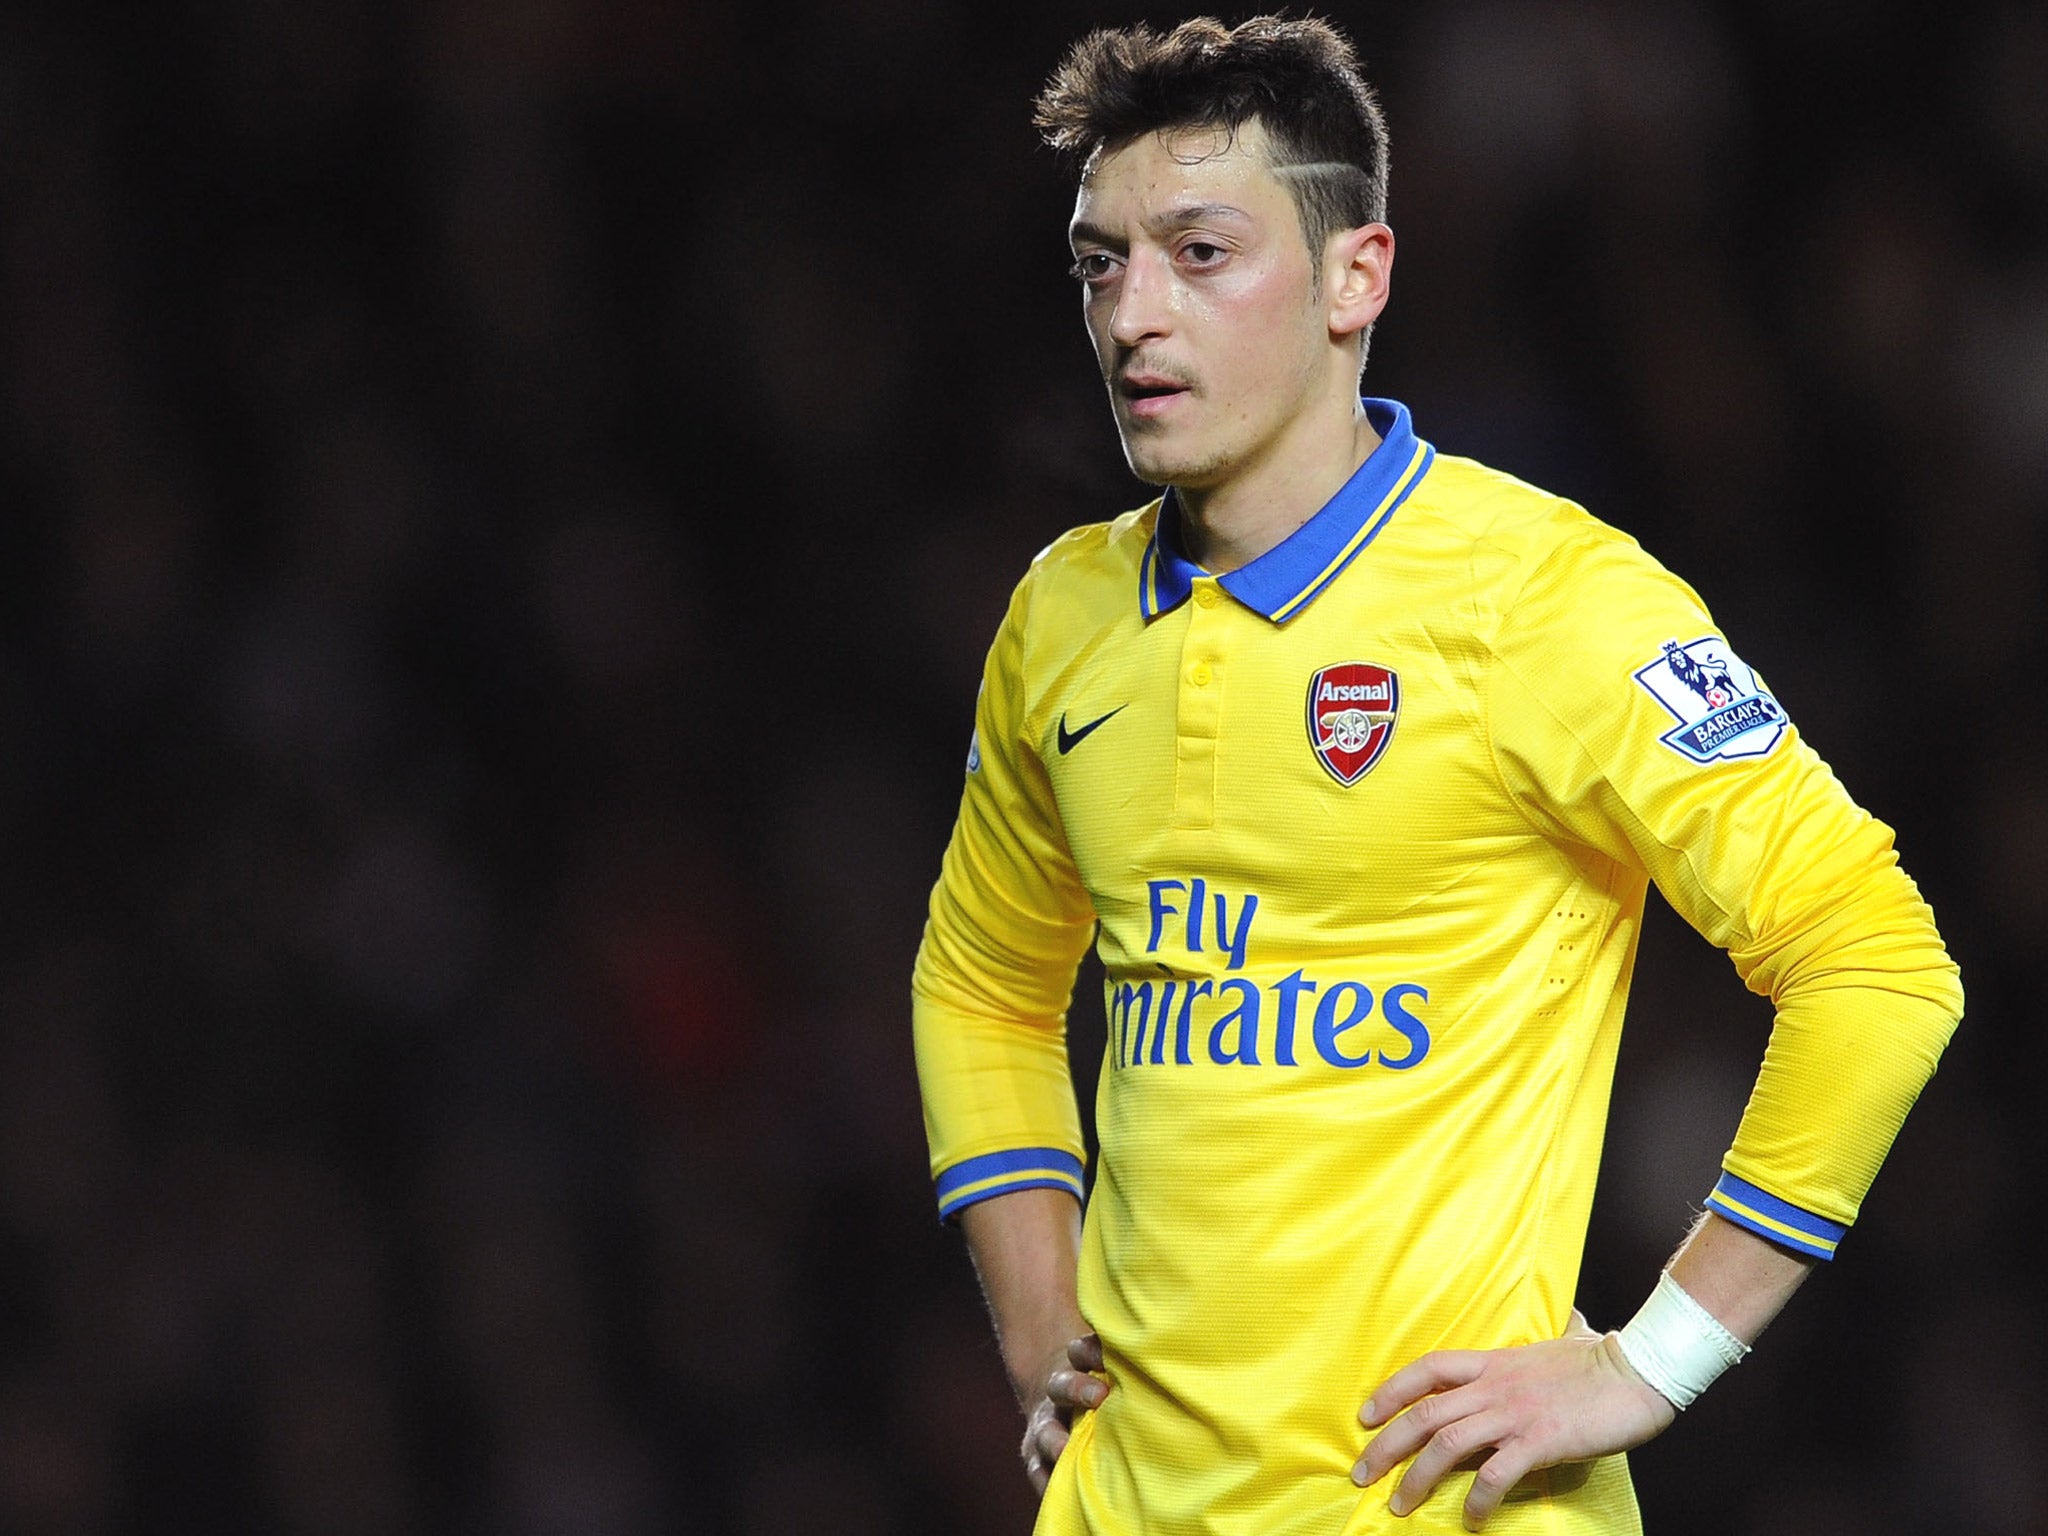 Mesut Özil ‘doesn’t come from a small club, he is used to pressure,’ said Arsène Wenger